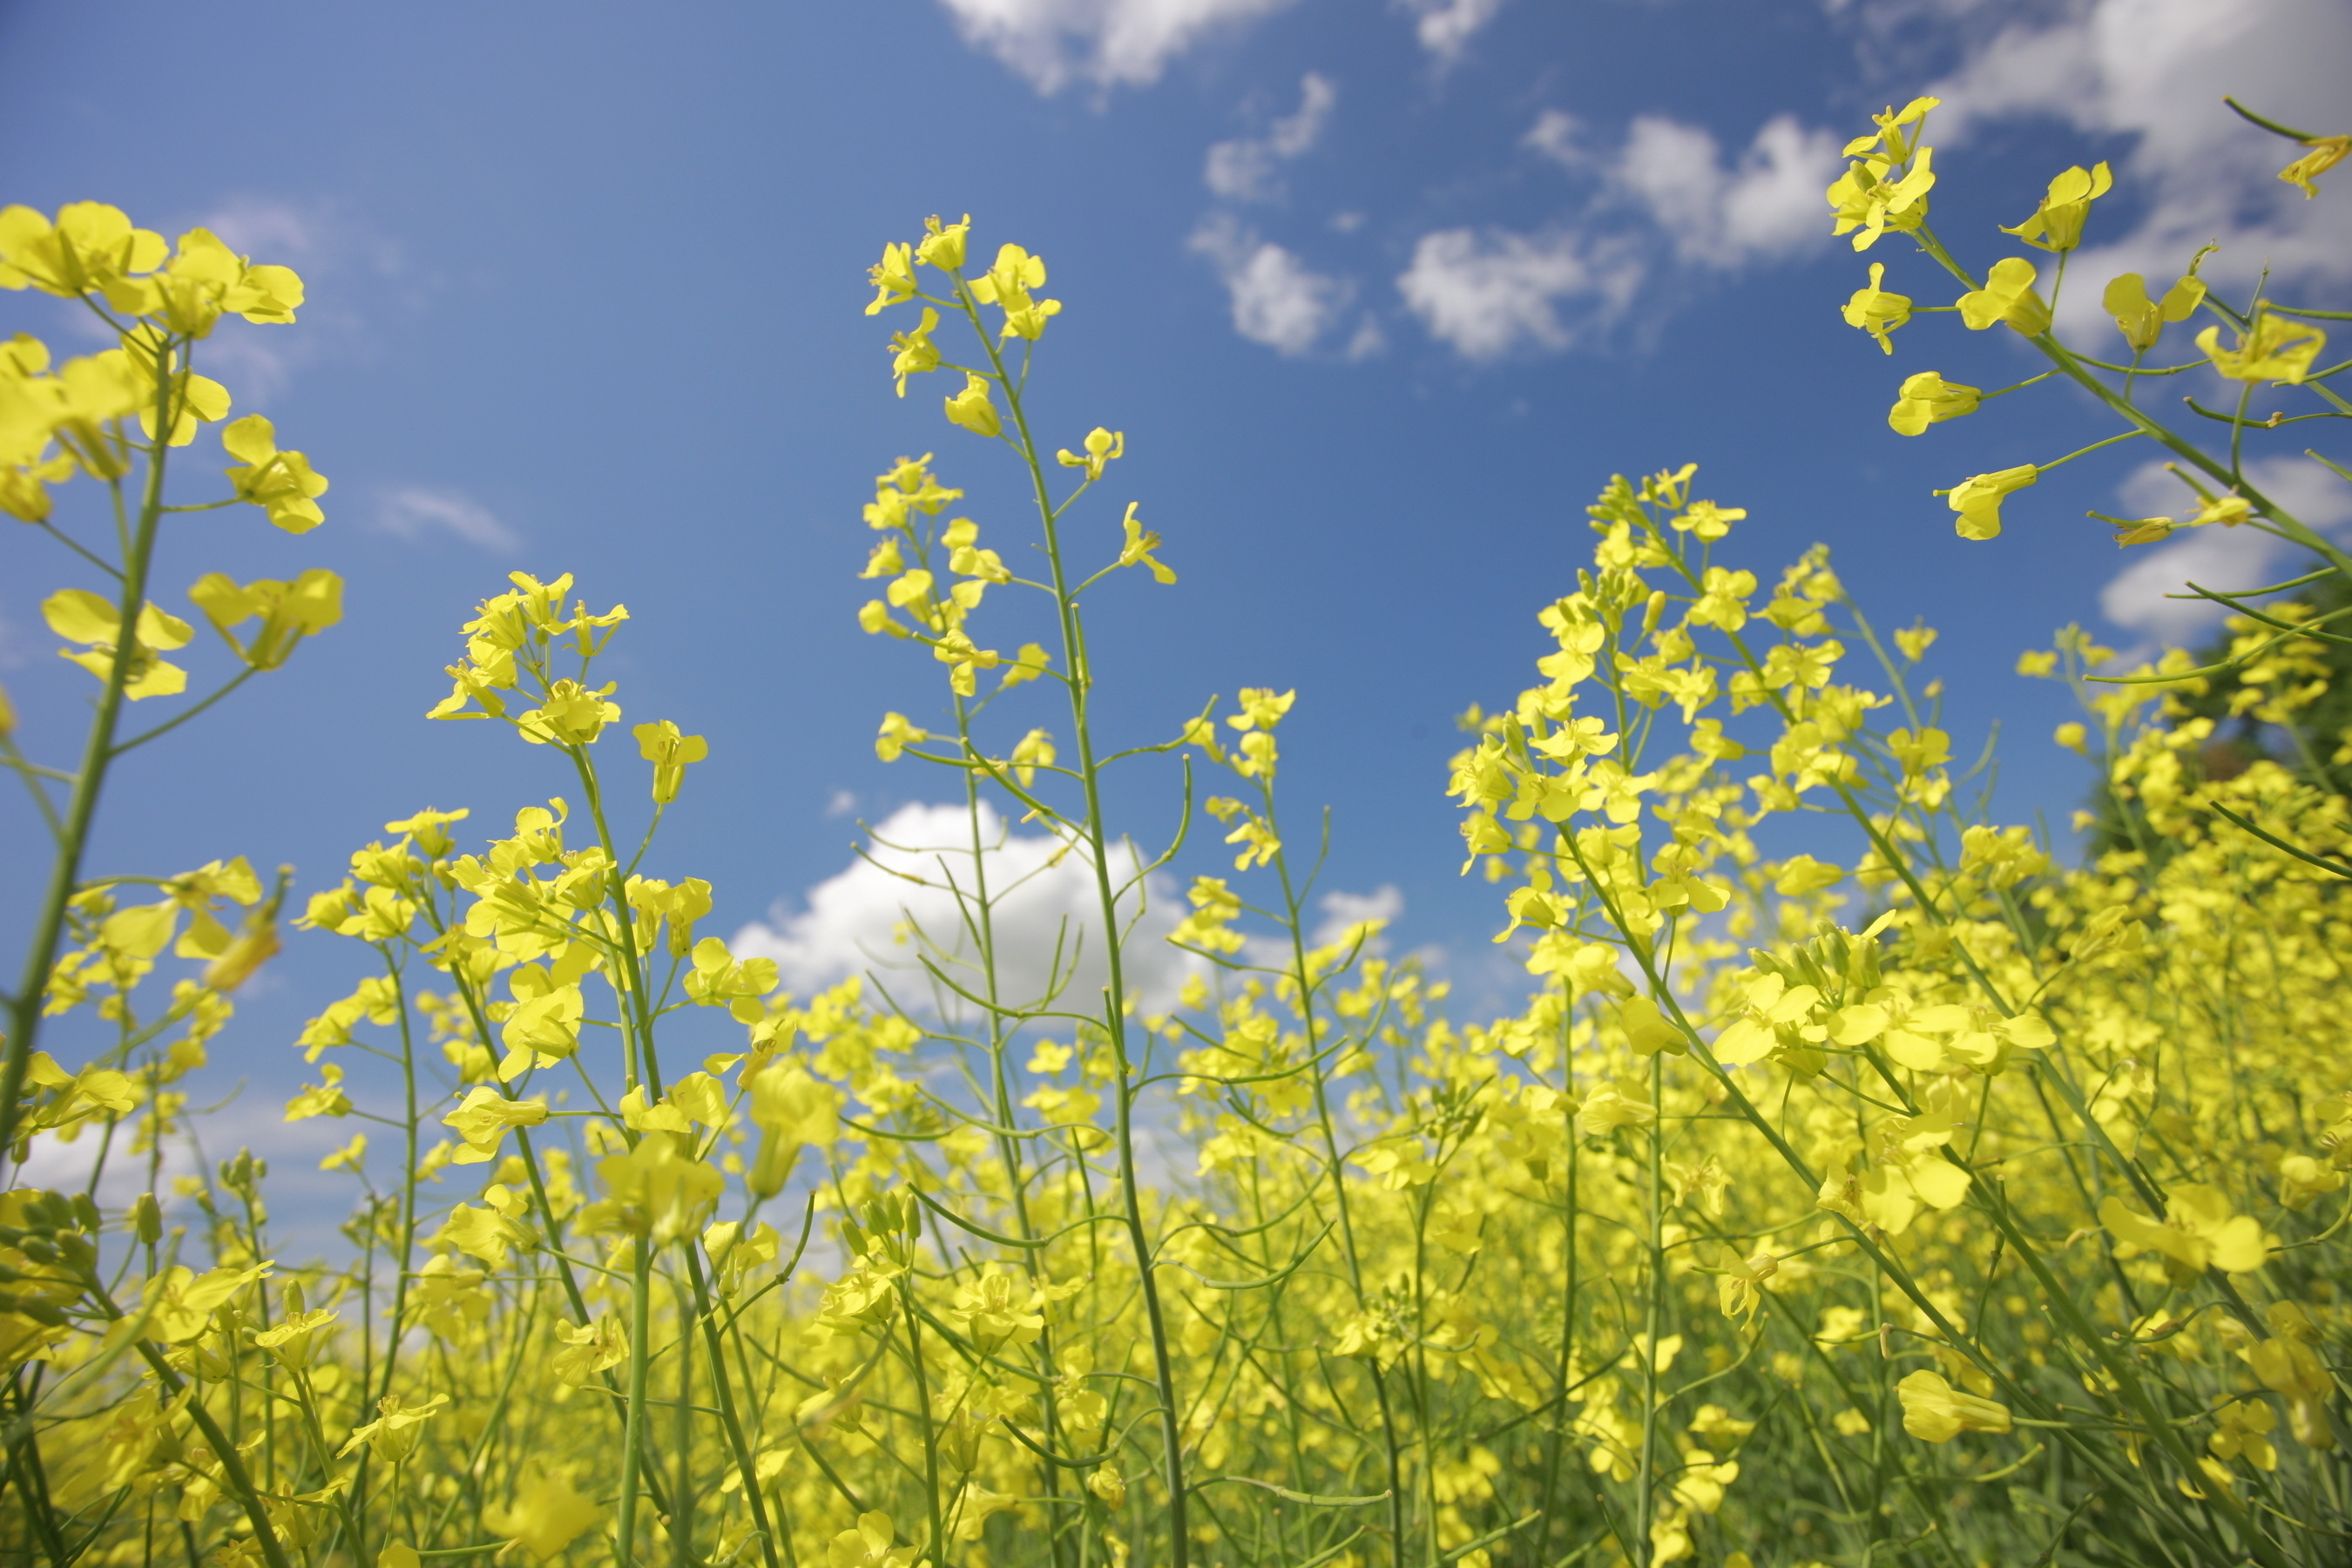 The oil extracted from canola plants is one of the healthiest in the world. Of all common cooking oils, canola has the most plant-based omega-3 fat (11 percent) and the least saturated fat (7 percent) - half that of olive oil (15 percent). (PRNewsFoto/CanolaInfo)